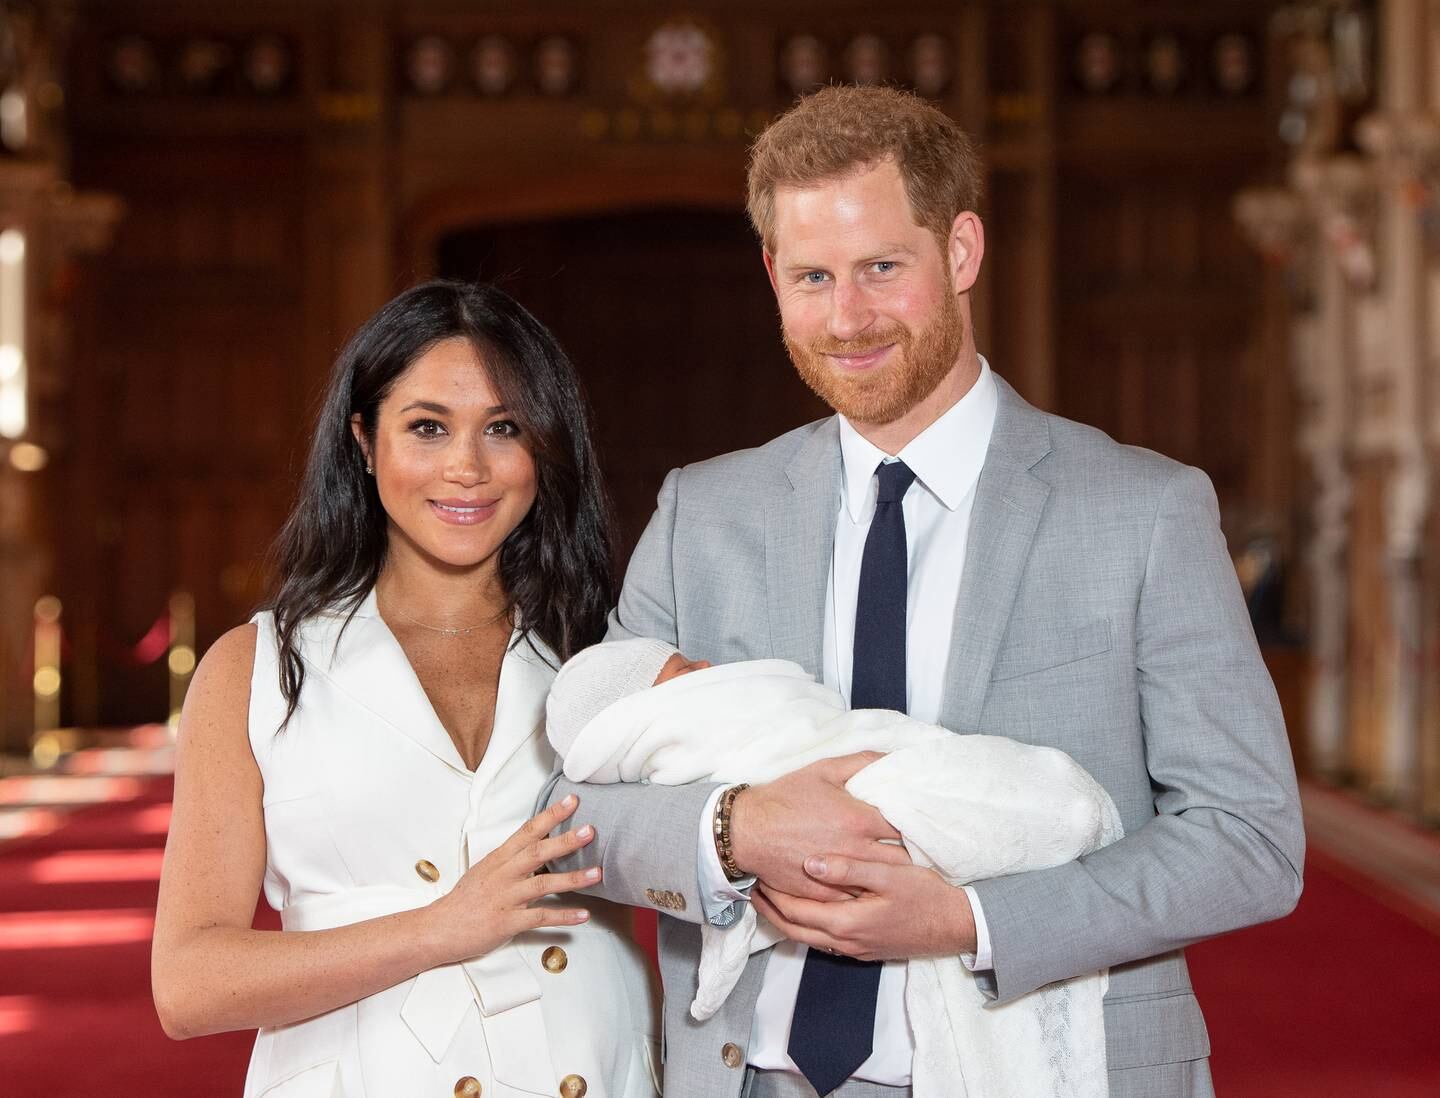 Prince Harry and Meghan, Duchess of Sussex, pose with their newborn son Archie at Windsor Castle in 2019. Getty Images